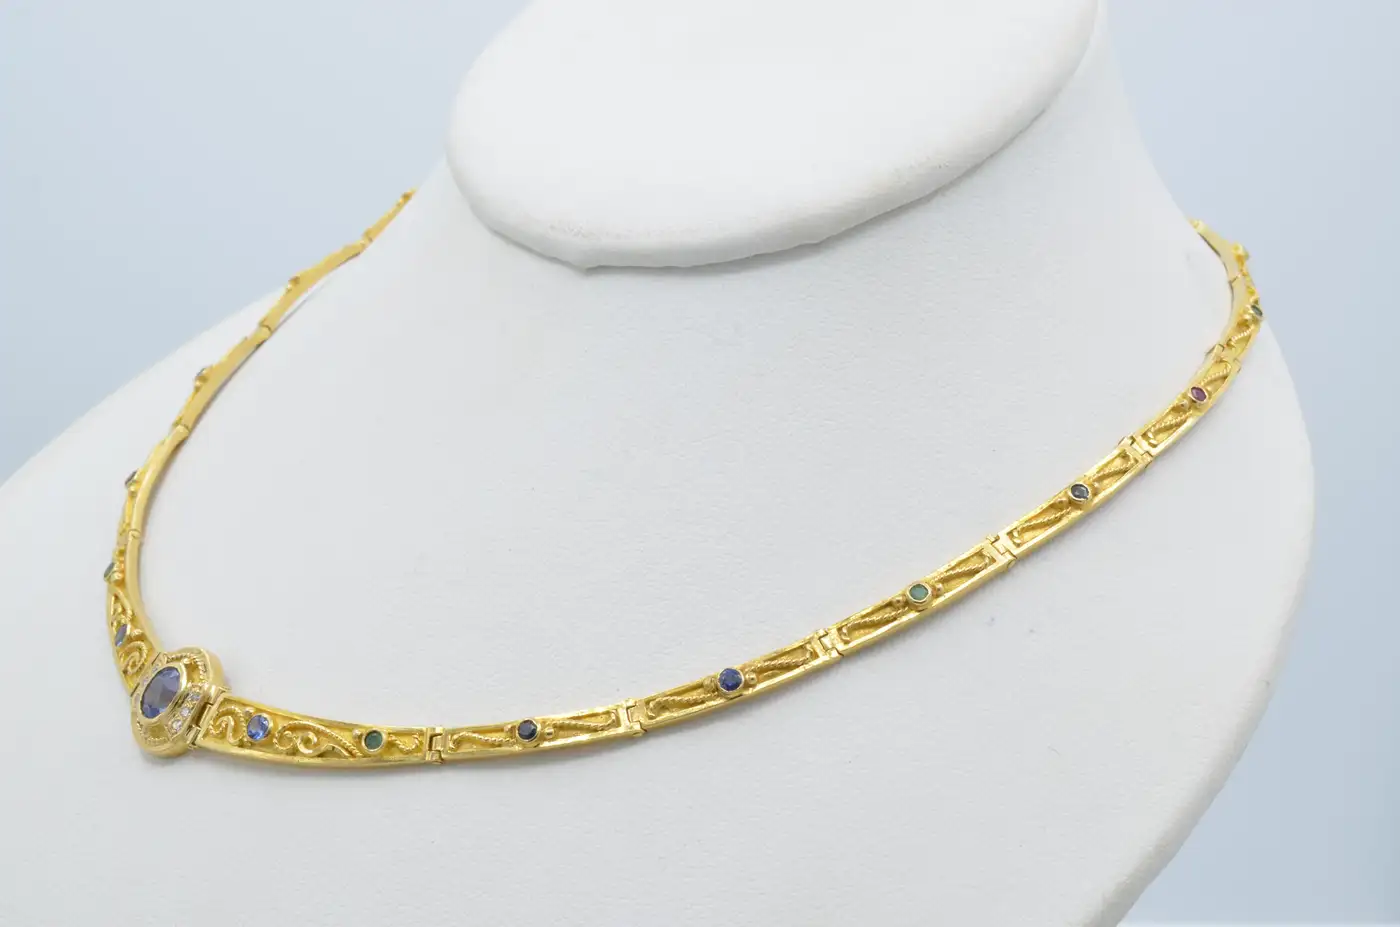 Gold-Greek-Collar-18K-and-Sapphires-Necklace-Articulate-Links-5.webp